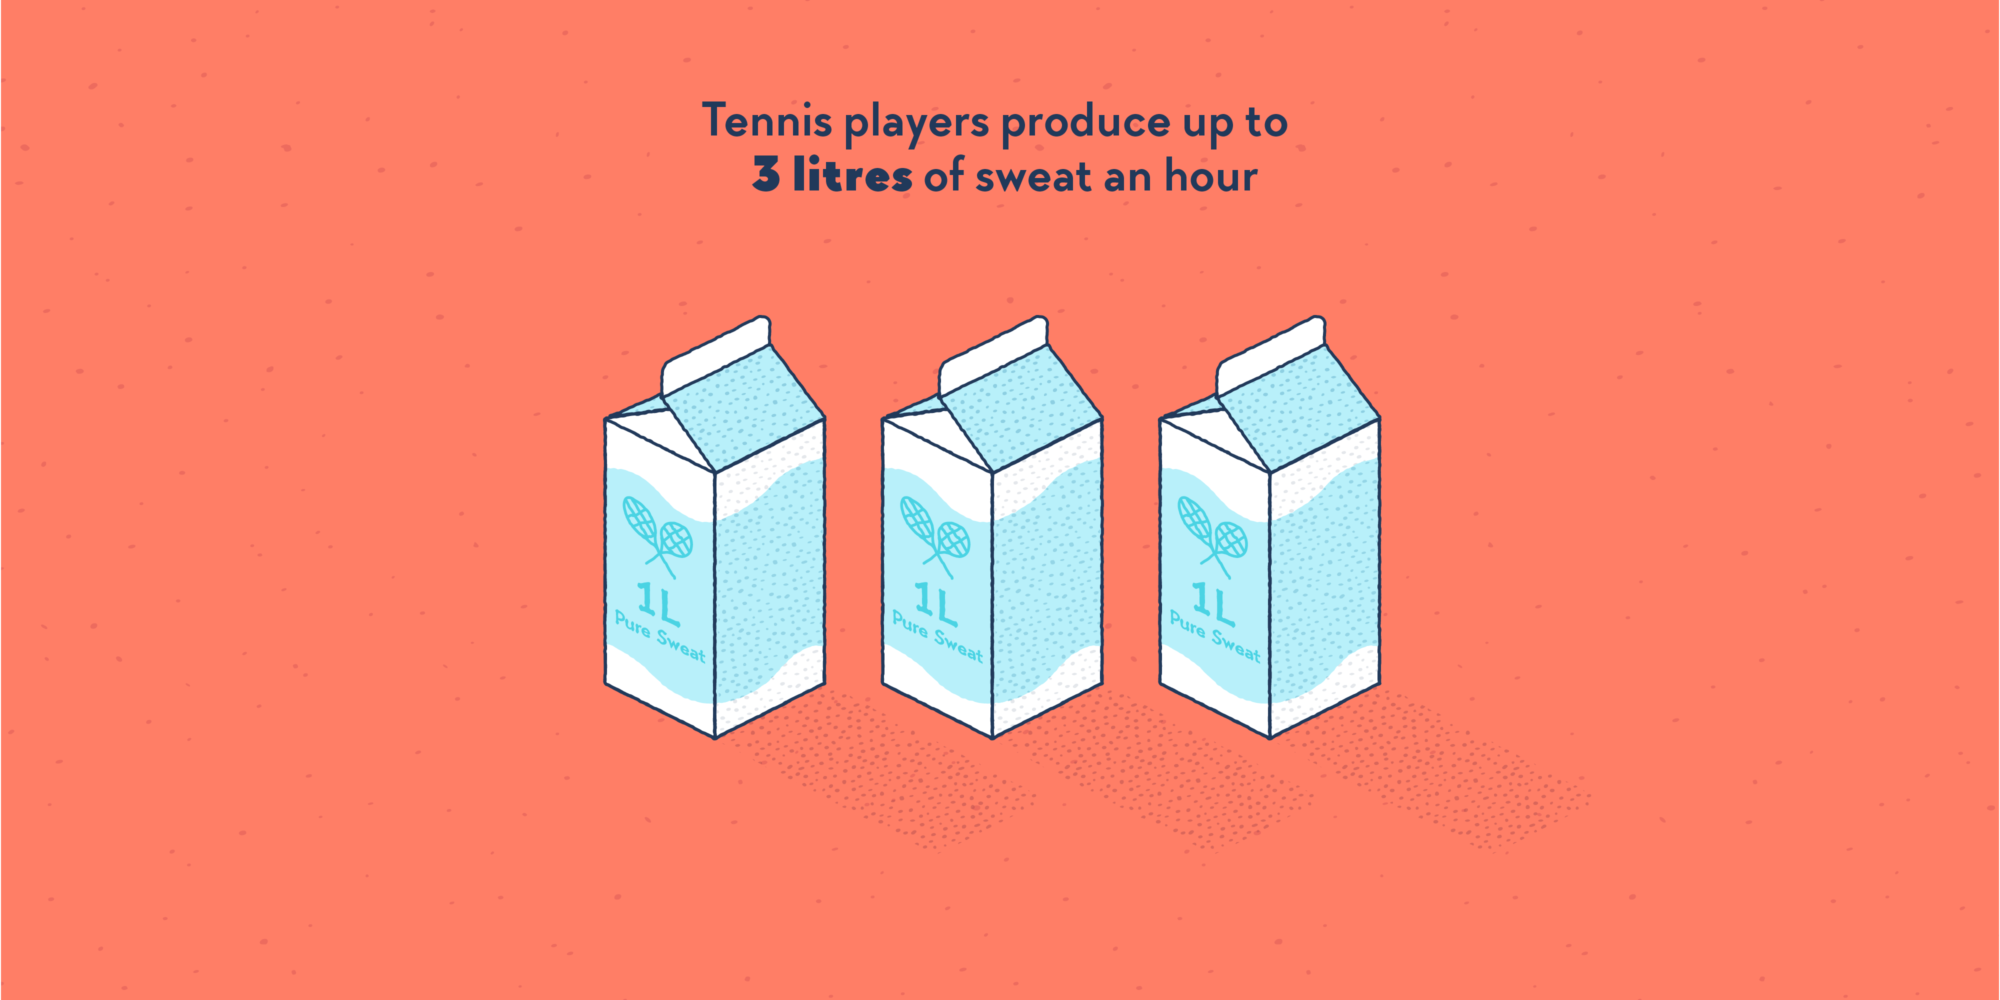 Three 1-litre cartons wearing the label “Pure sweat” and a pictogramme of tennis rackets.